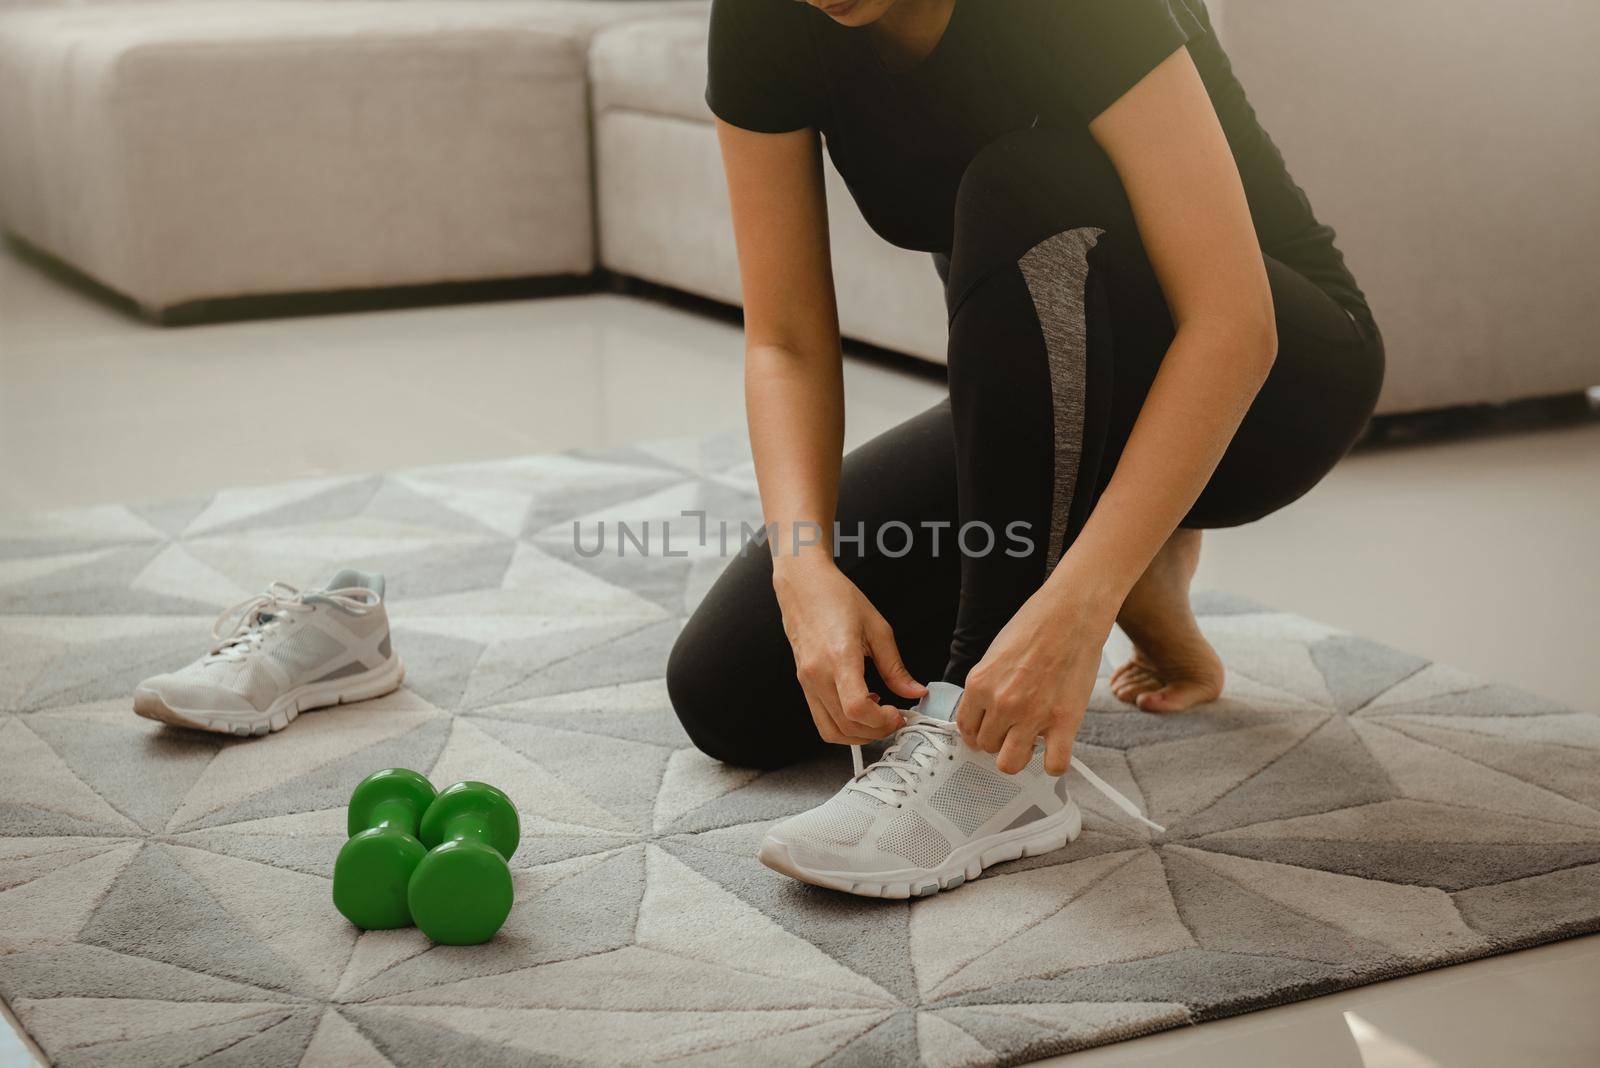 Woman getting ready for workout at home. She is tying shoelace on sneakers. Sport and recreation concept.